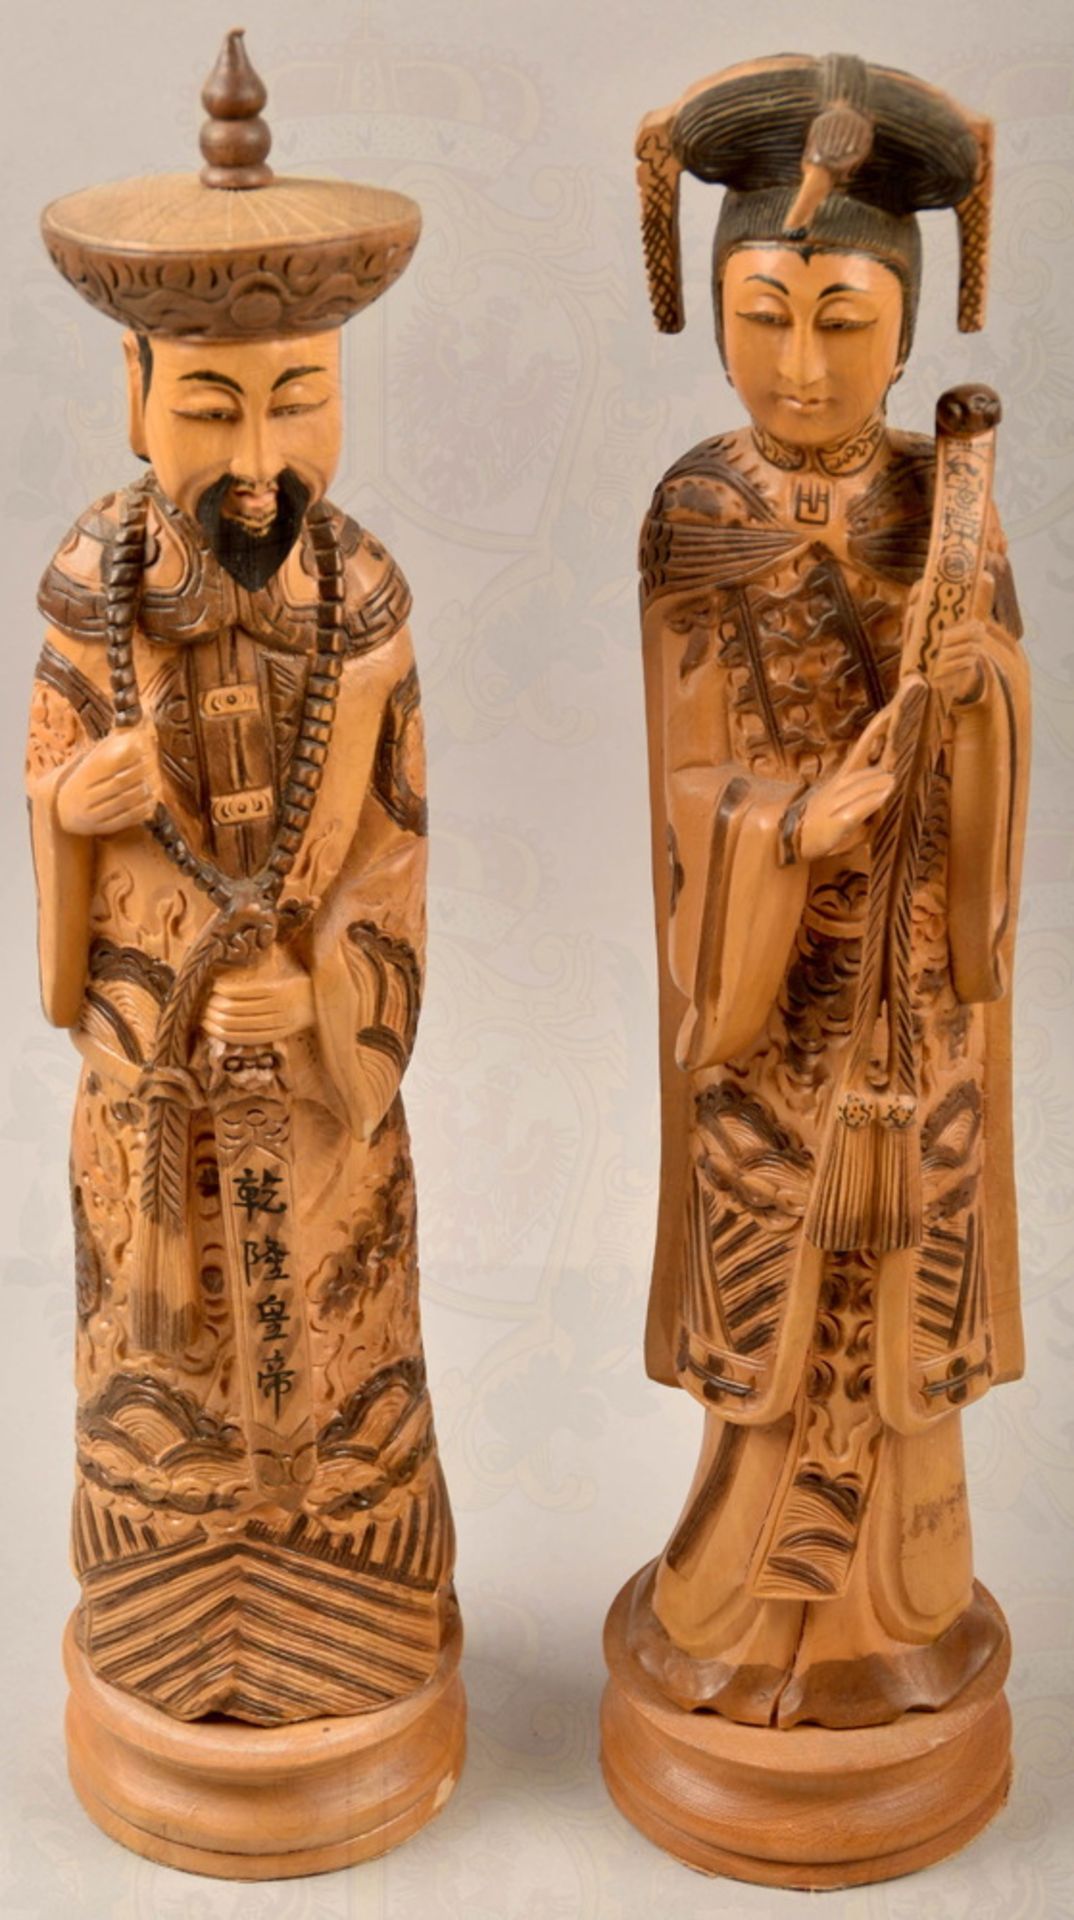 Pair of wooden figures with traditional Asian clothing